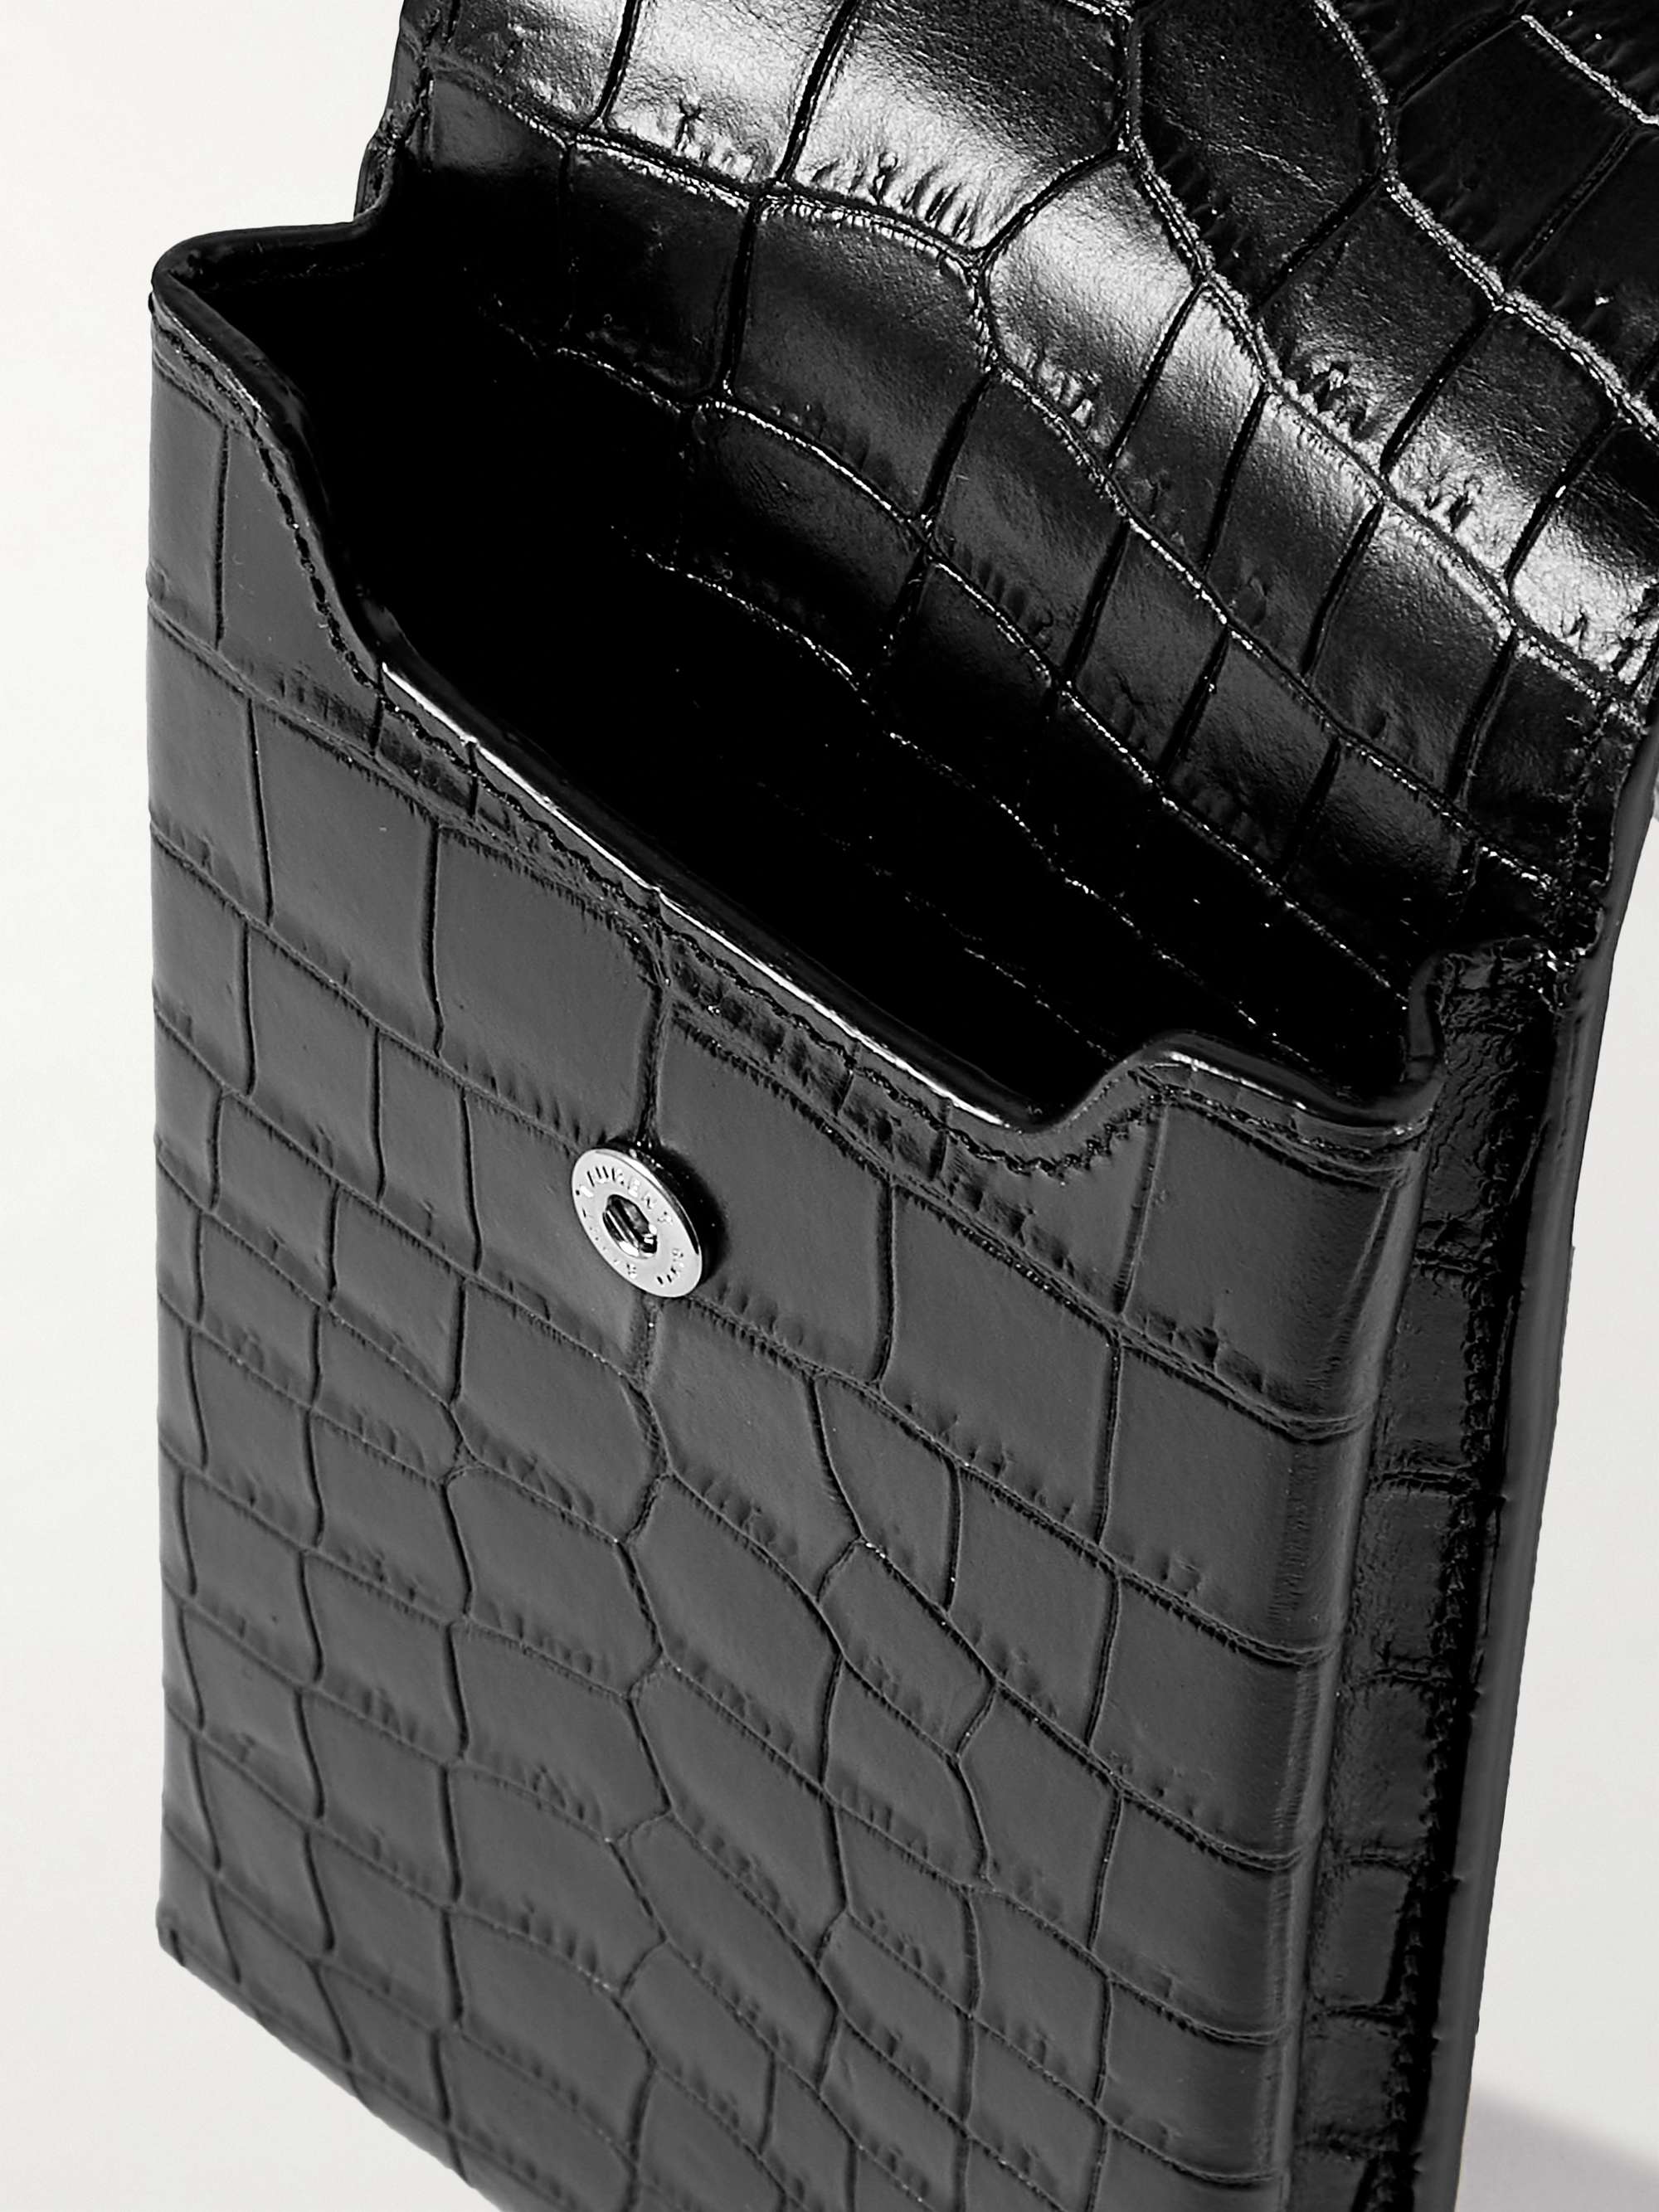 SAINT LAURENT Croc-Effect Leather Phone Pouch with Lanyard